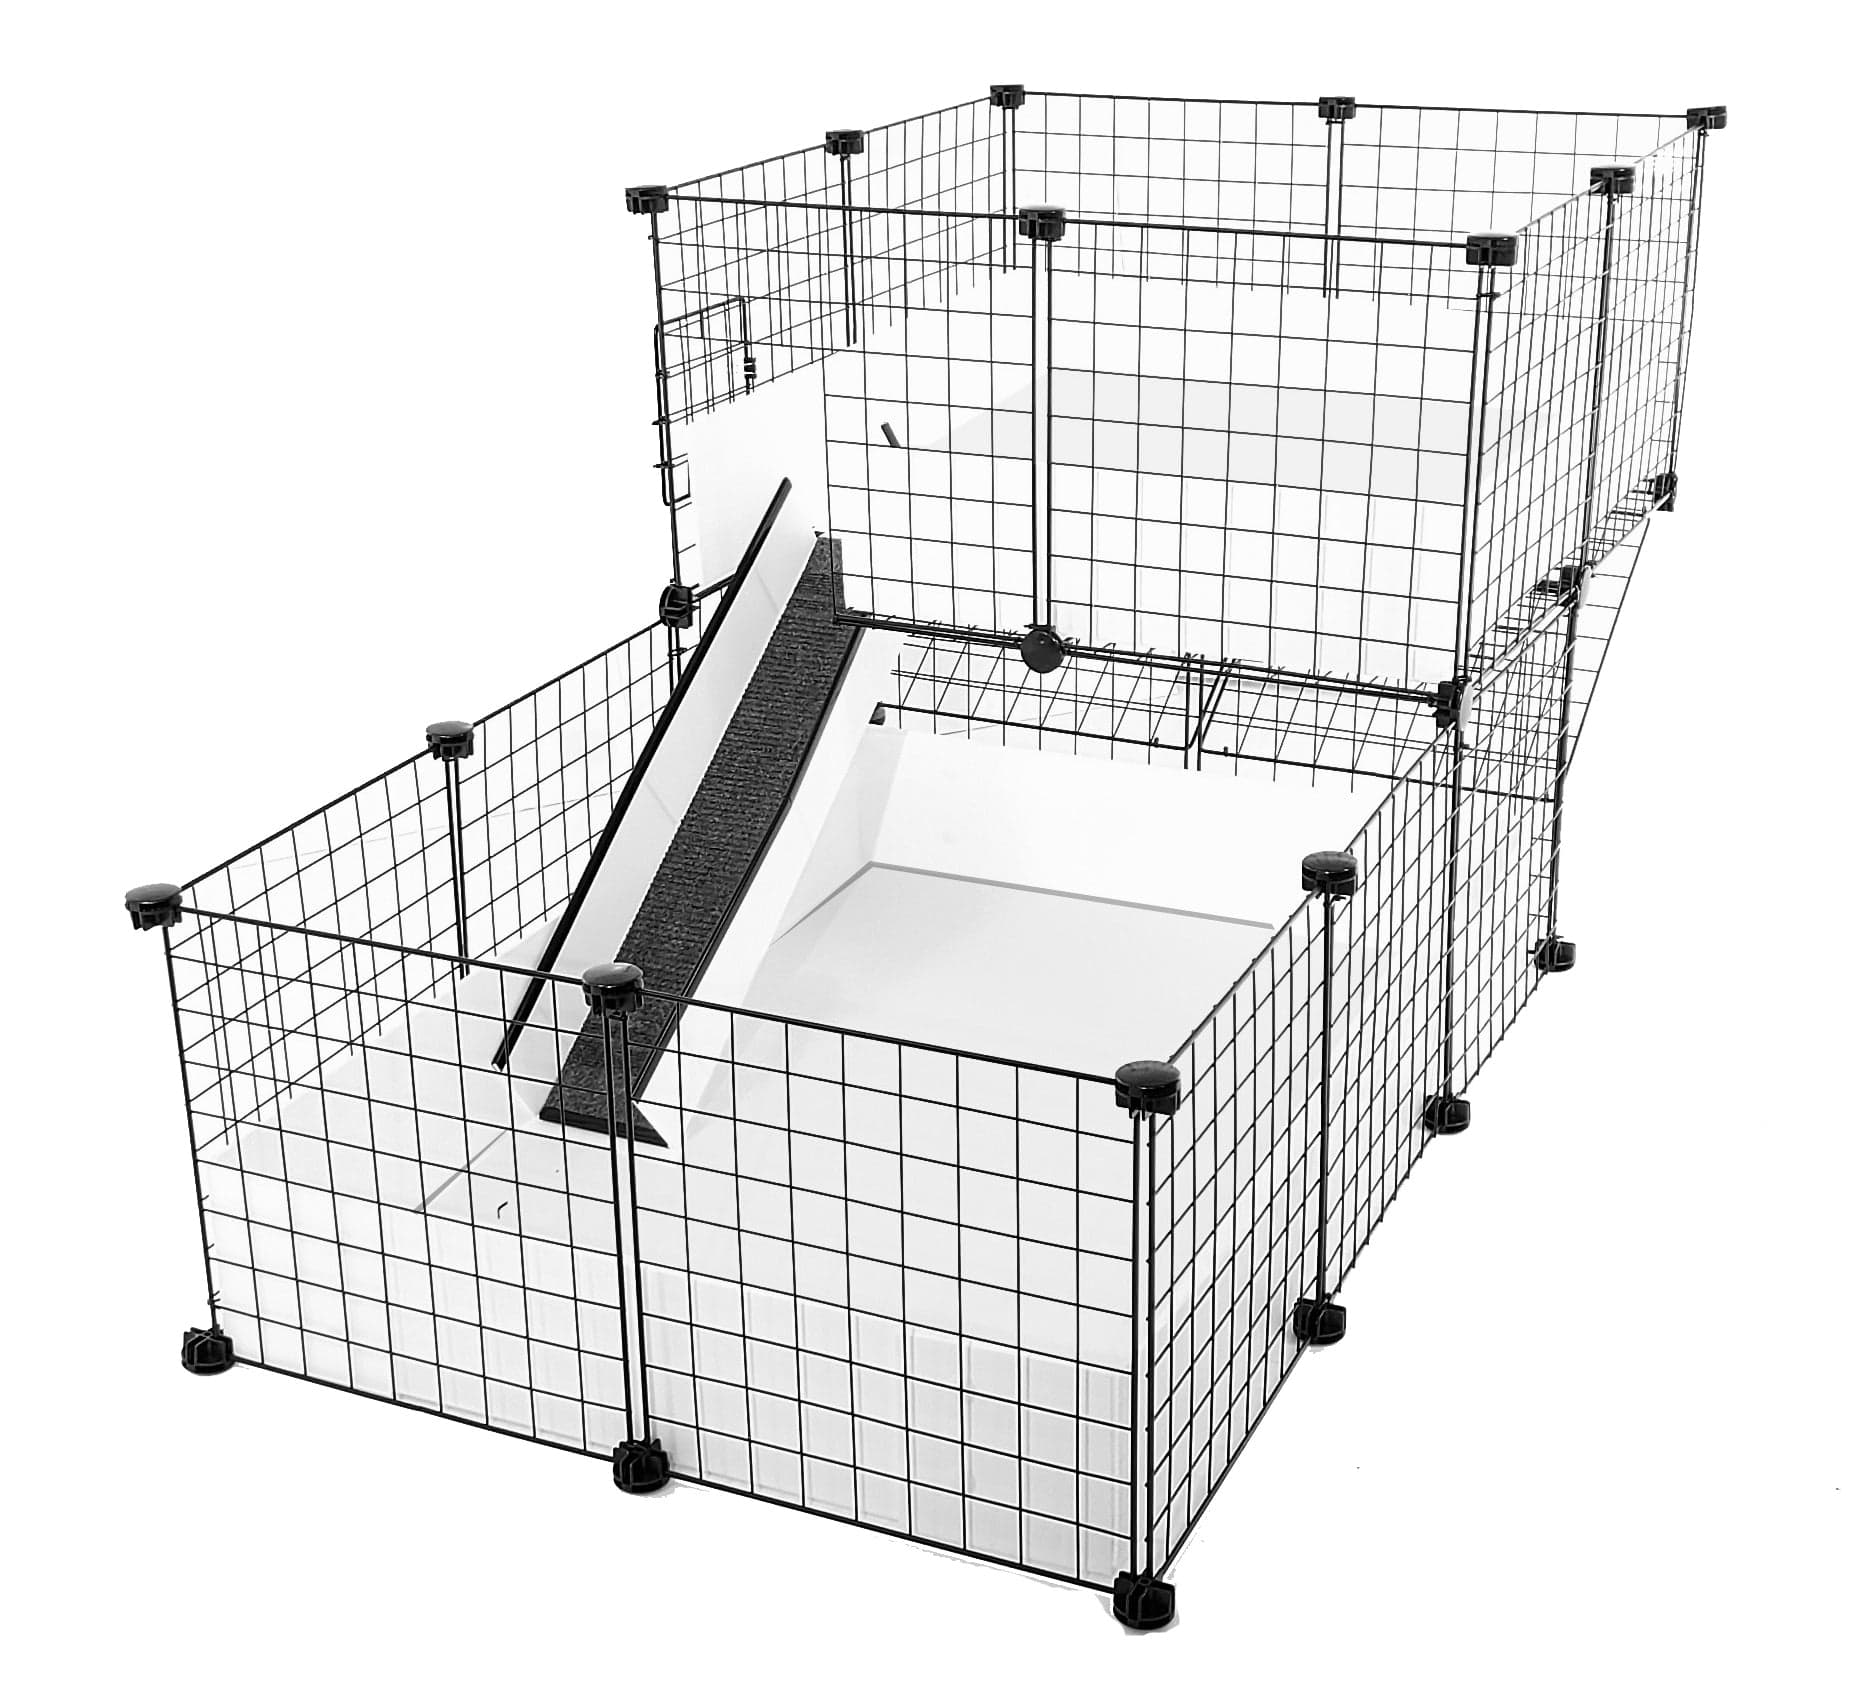 White c&c guinea pig cage with an offset wide loft and black grids